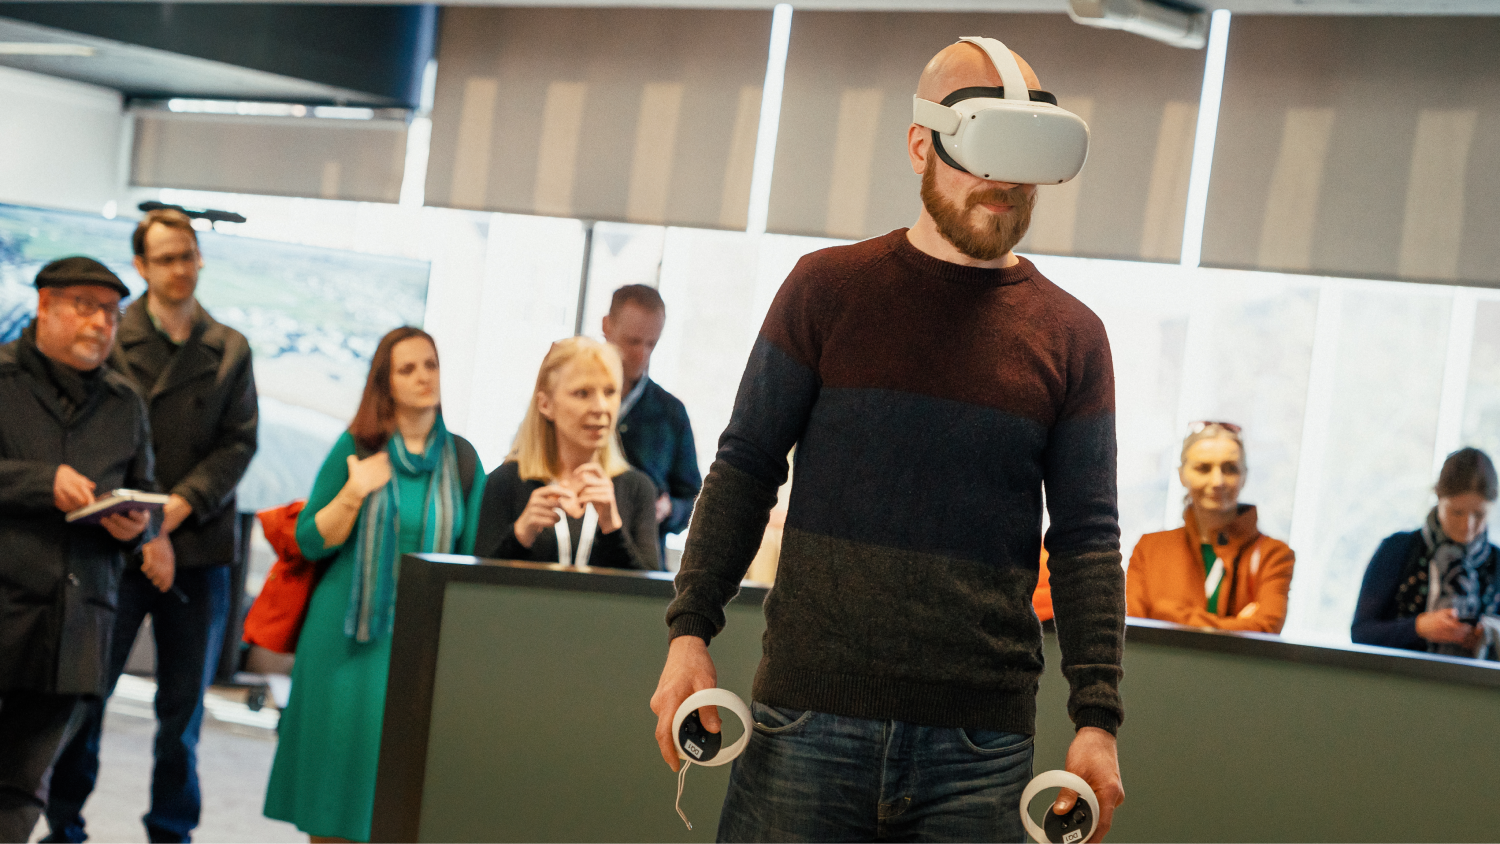 A man stands using a VR headset with a crowd of onlookers watching from behind 